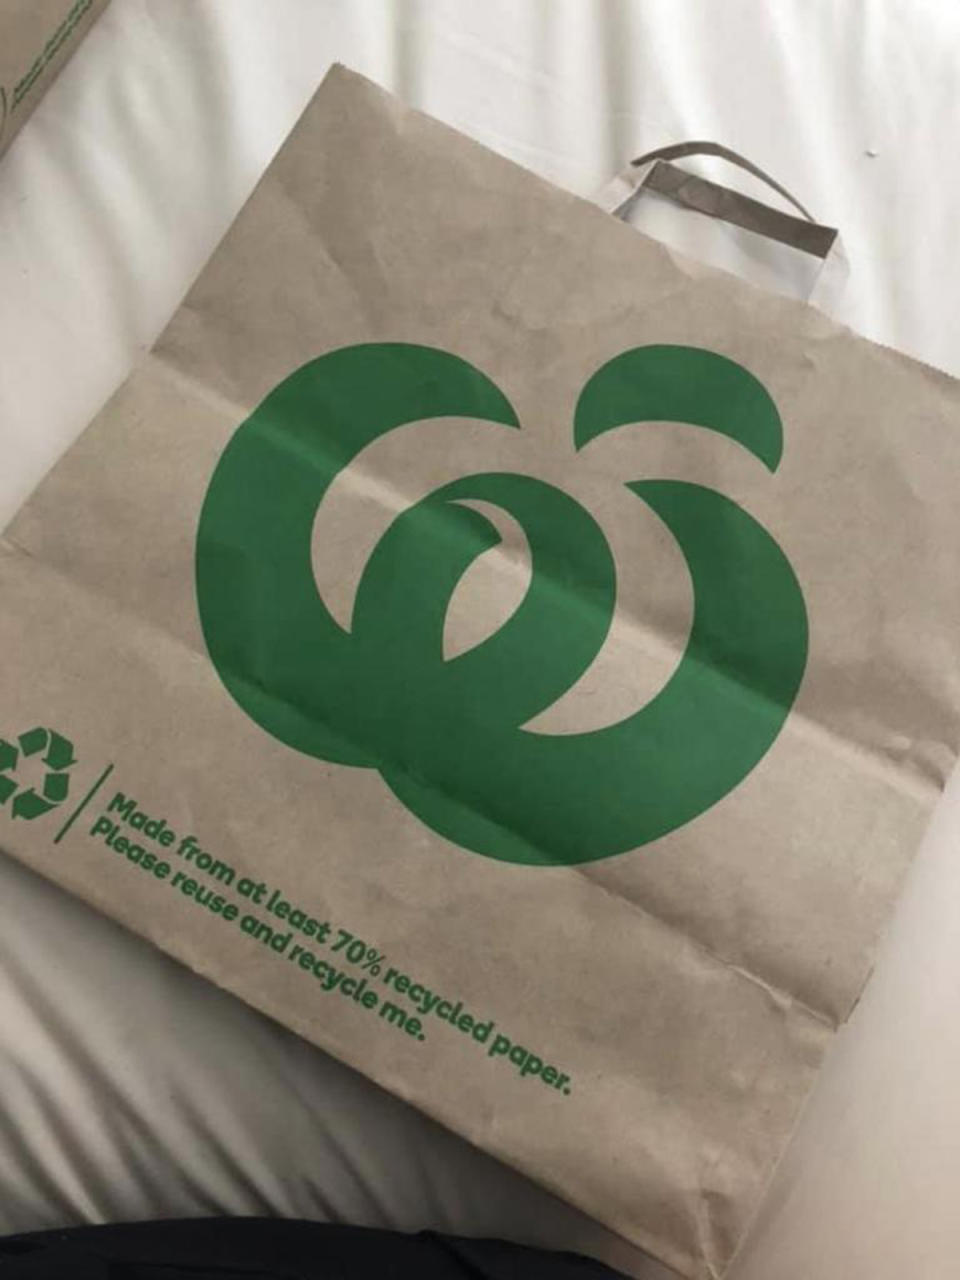 A Woolworths paper shopping bag with a large green Woolworths logo. Photo: Facebook.